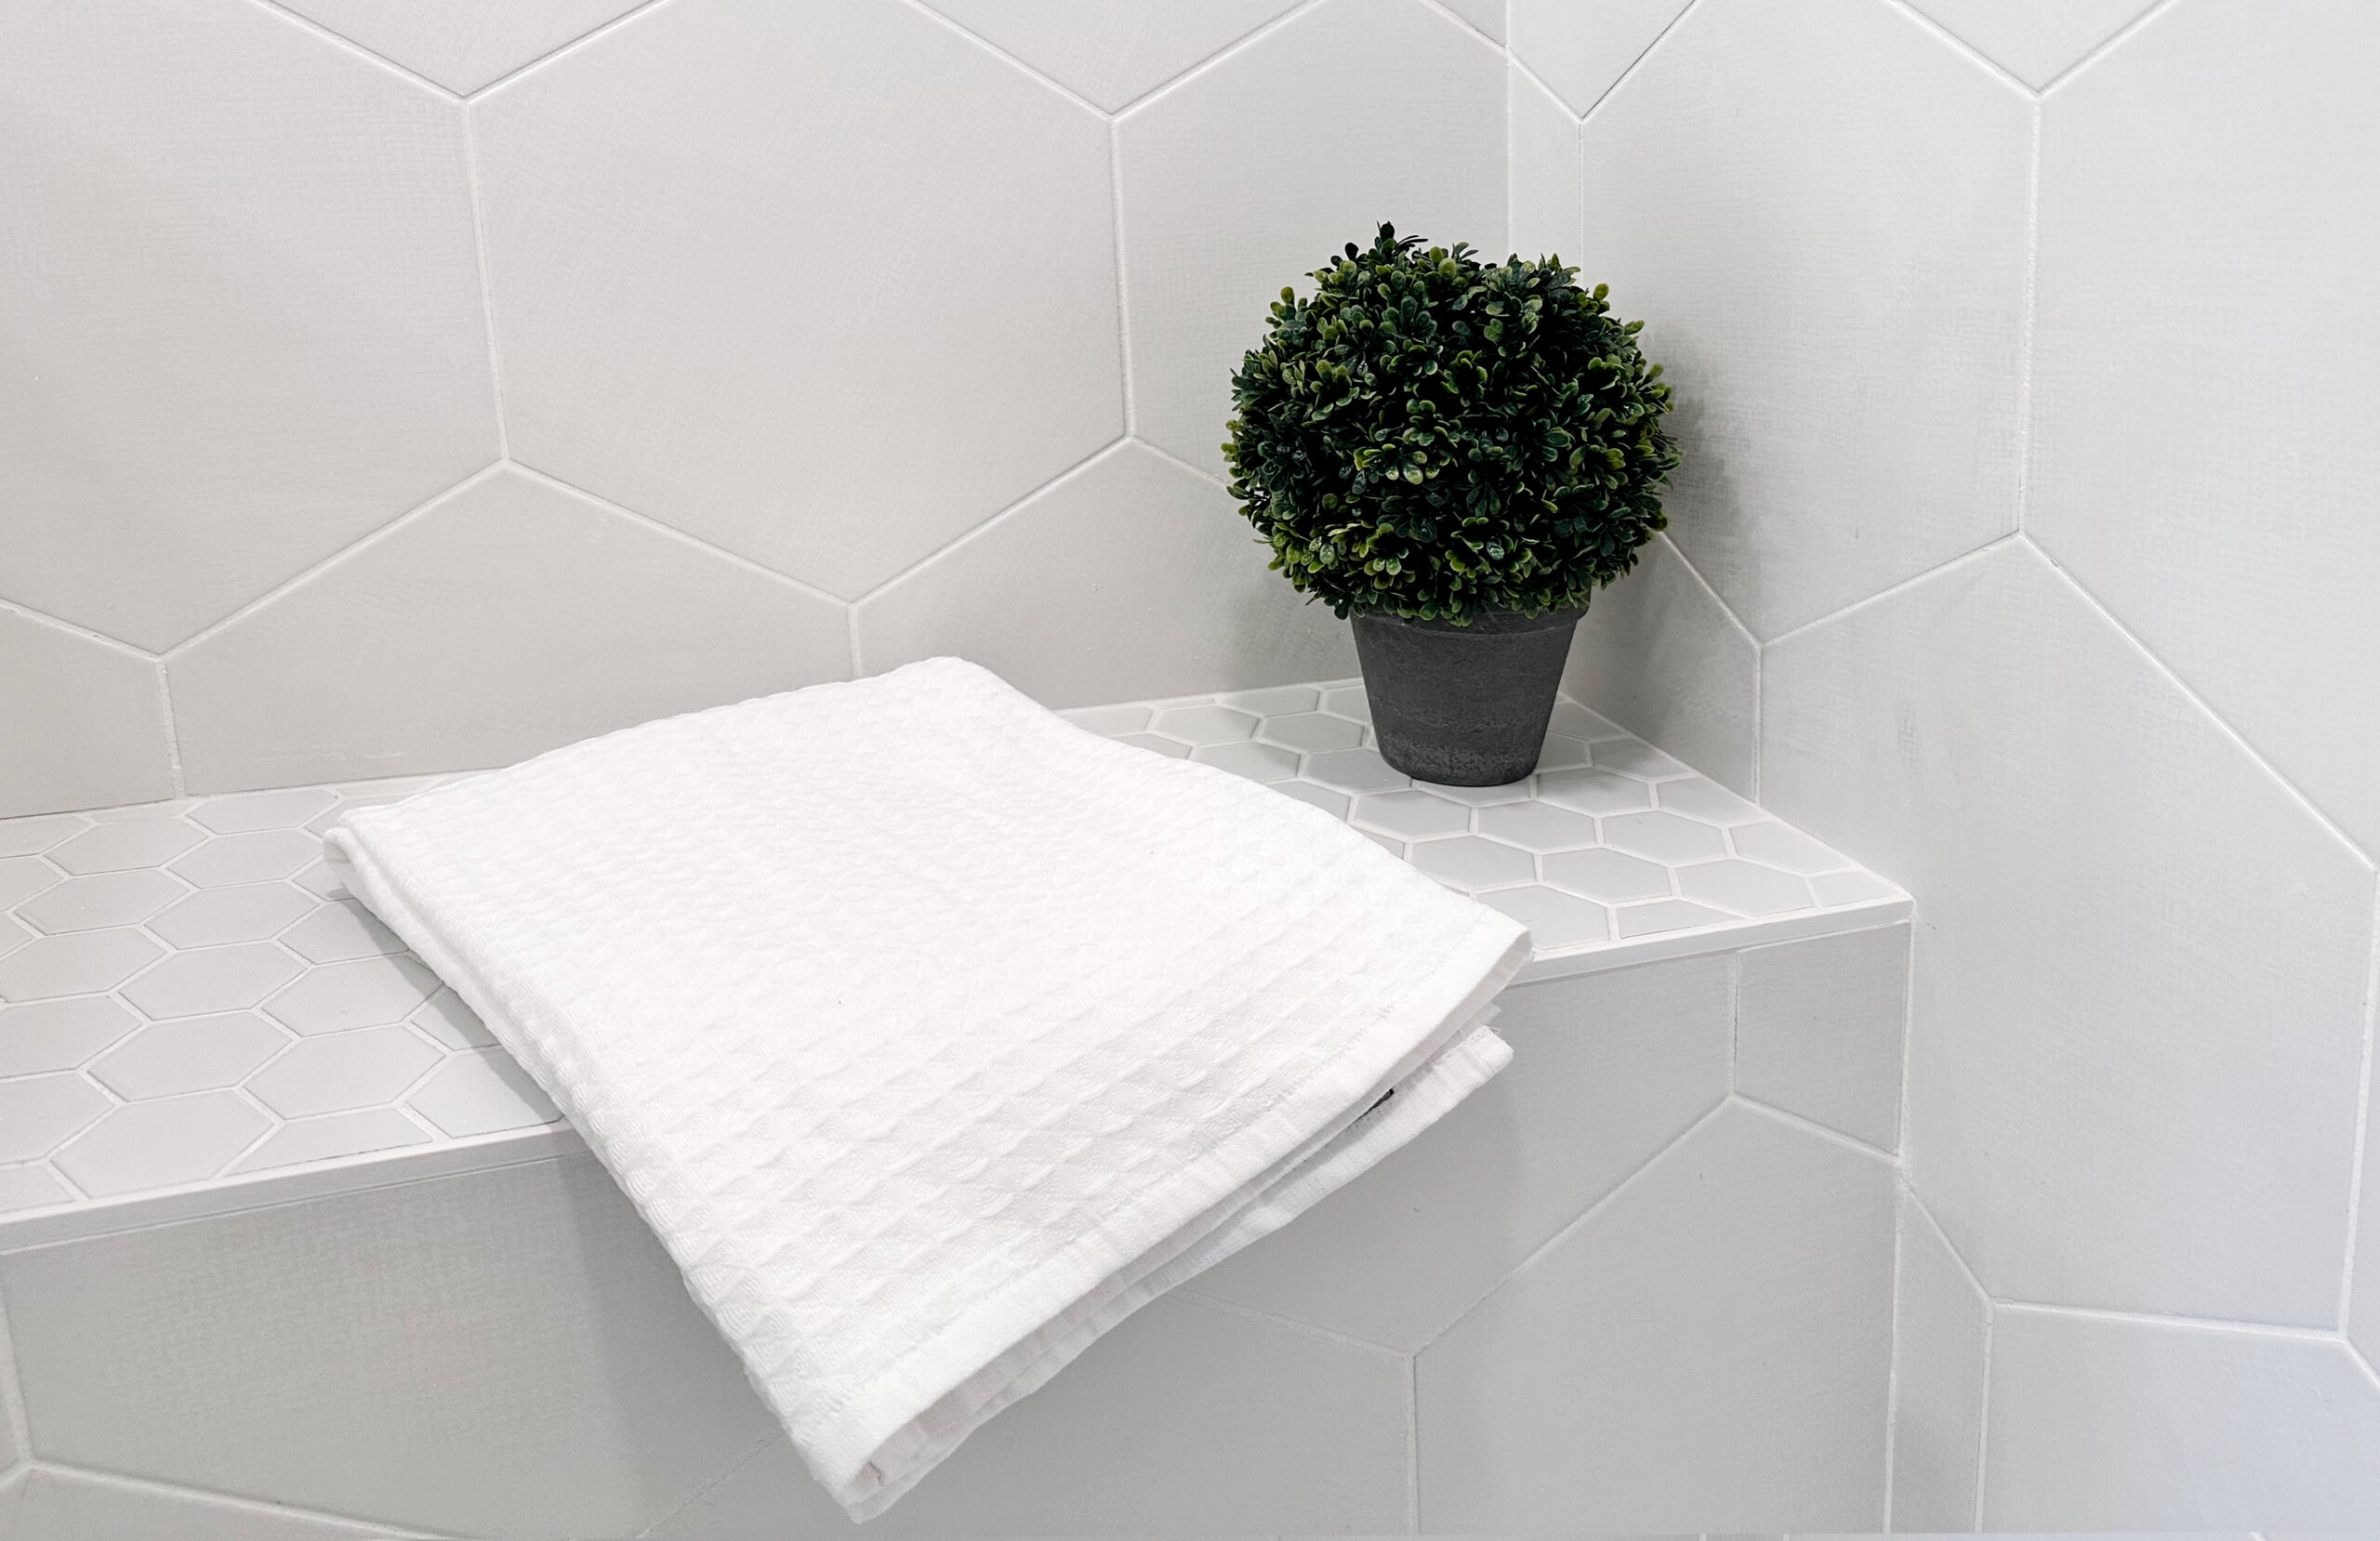 tiled shower bench with white towel and plant